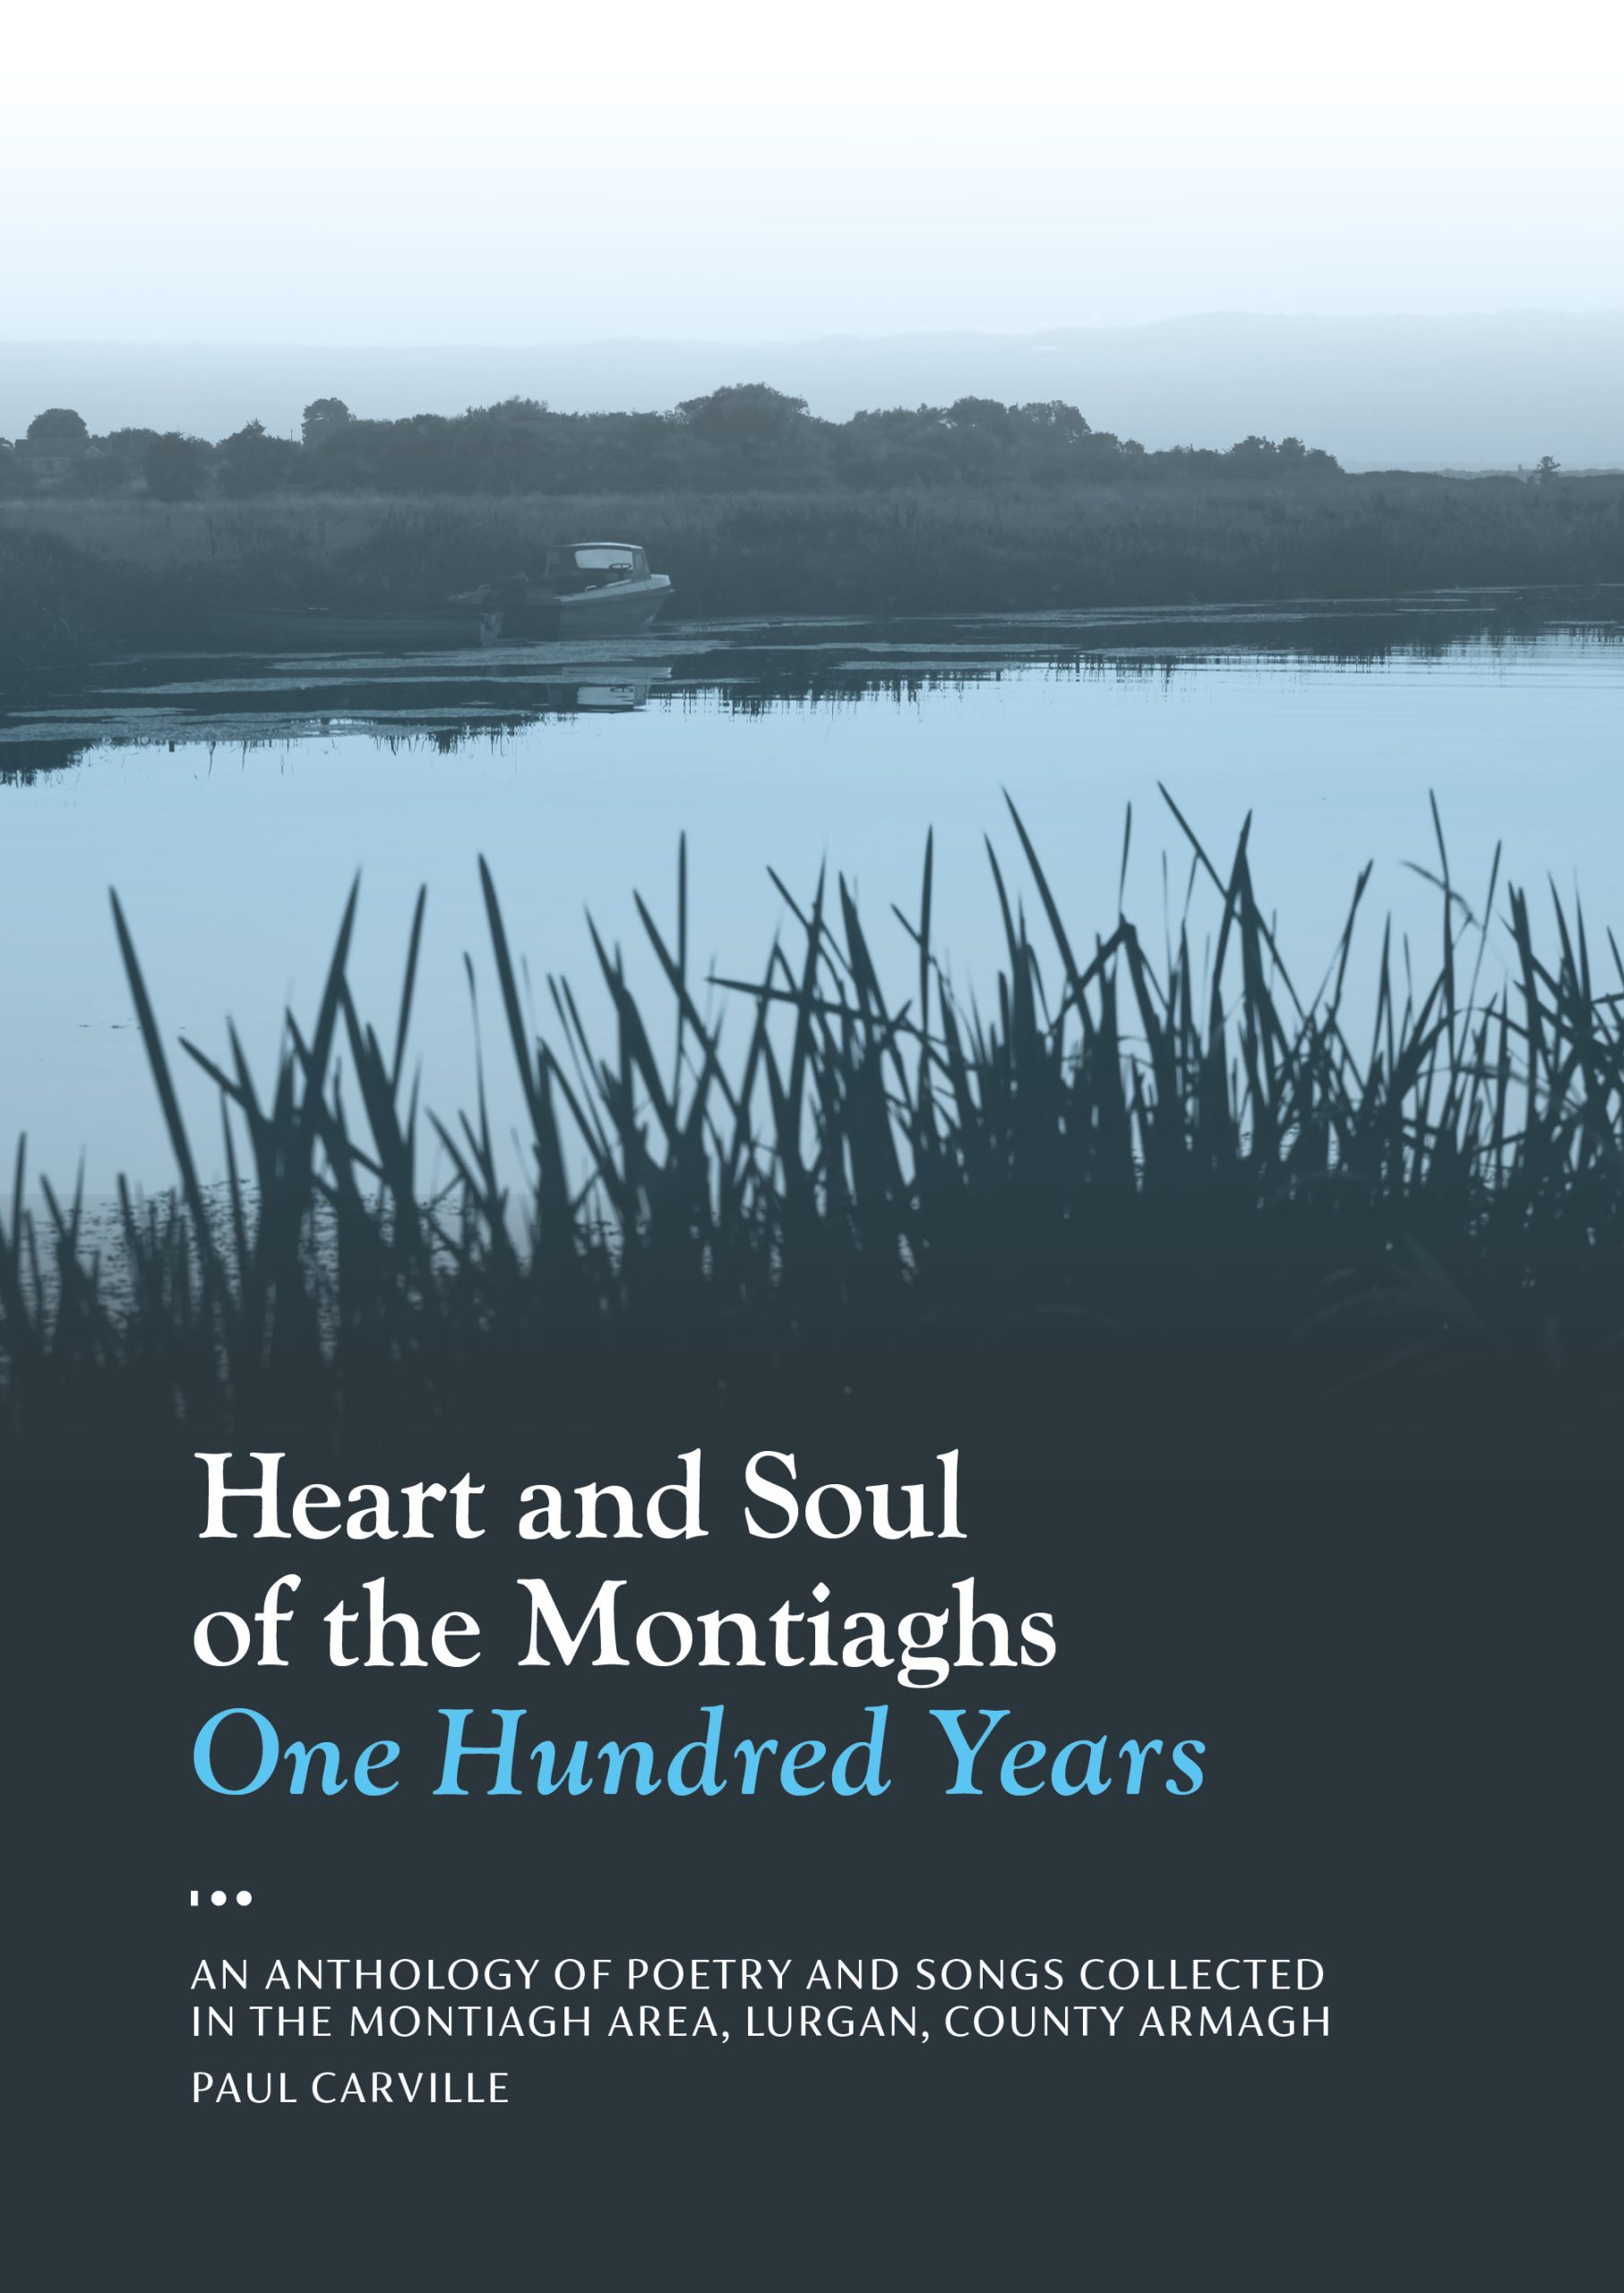 1 February 2023: Public Launch of ‘Heart and Soul of Montiaghs’ Book